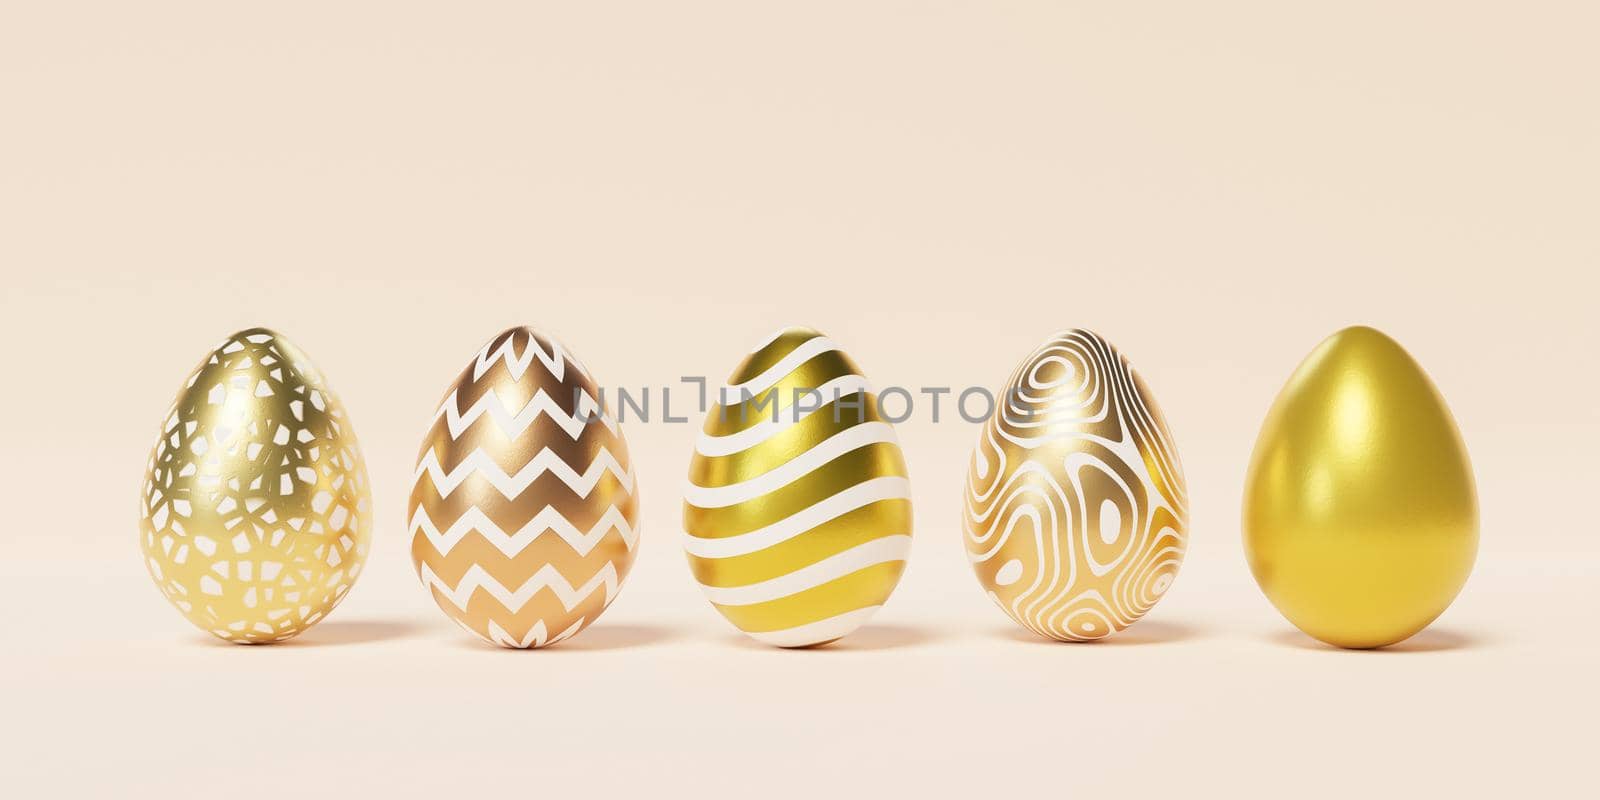 Set of Easter eggs decorated with golden textures and patterns on beige background, spring April holidays card, 3d illustration render by Frostroomhead